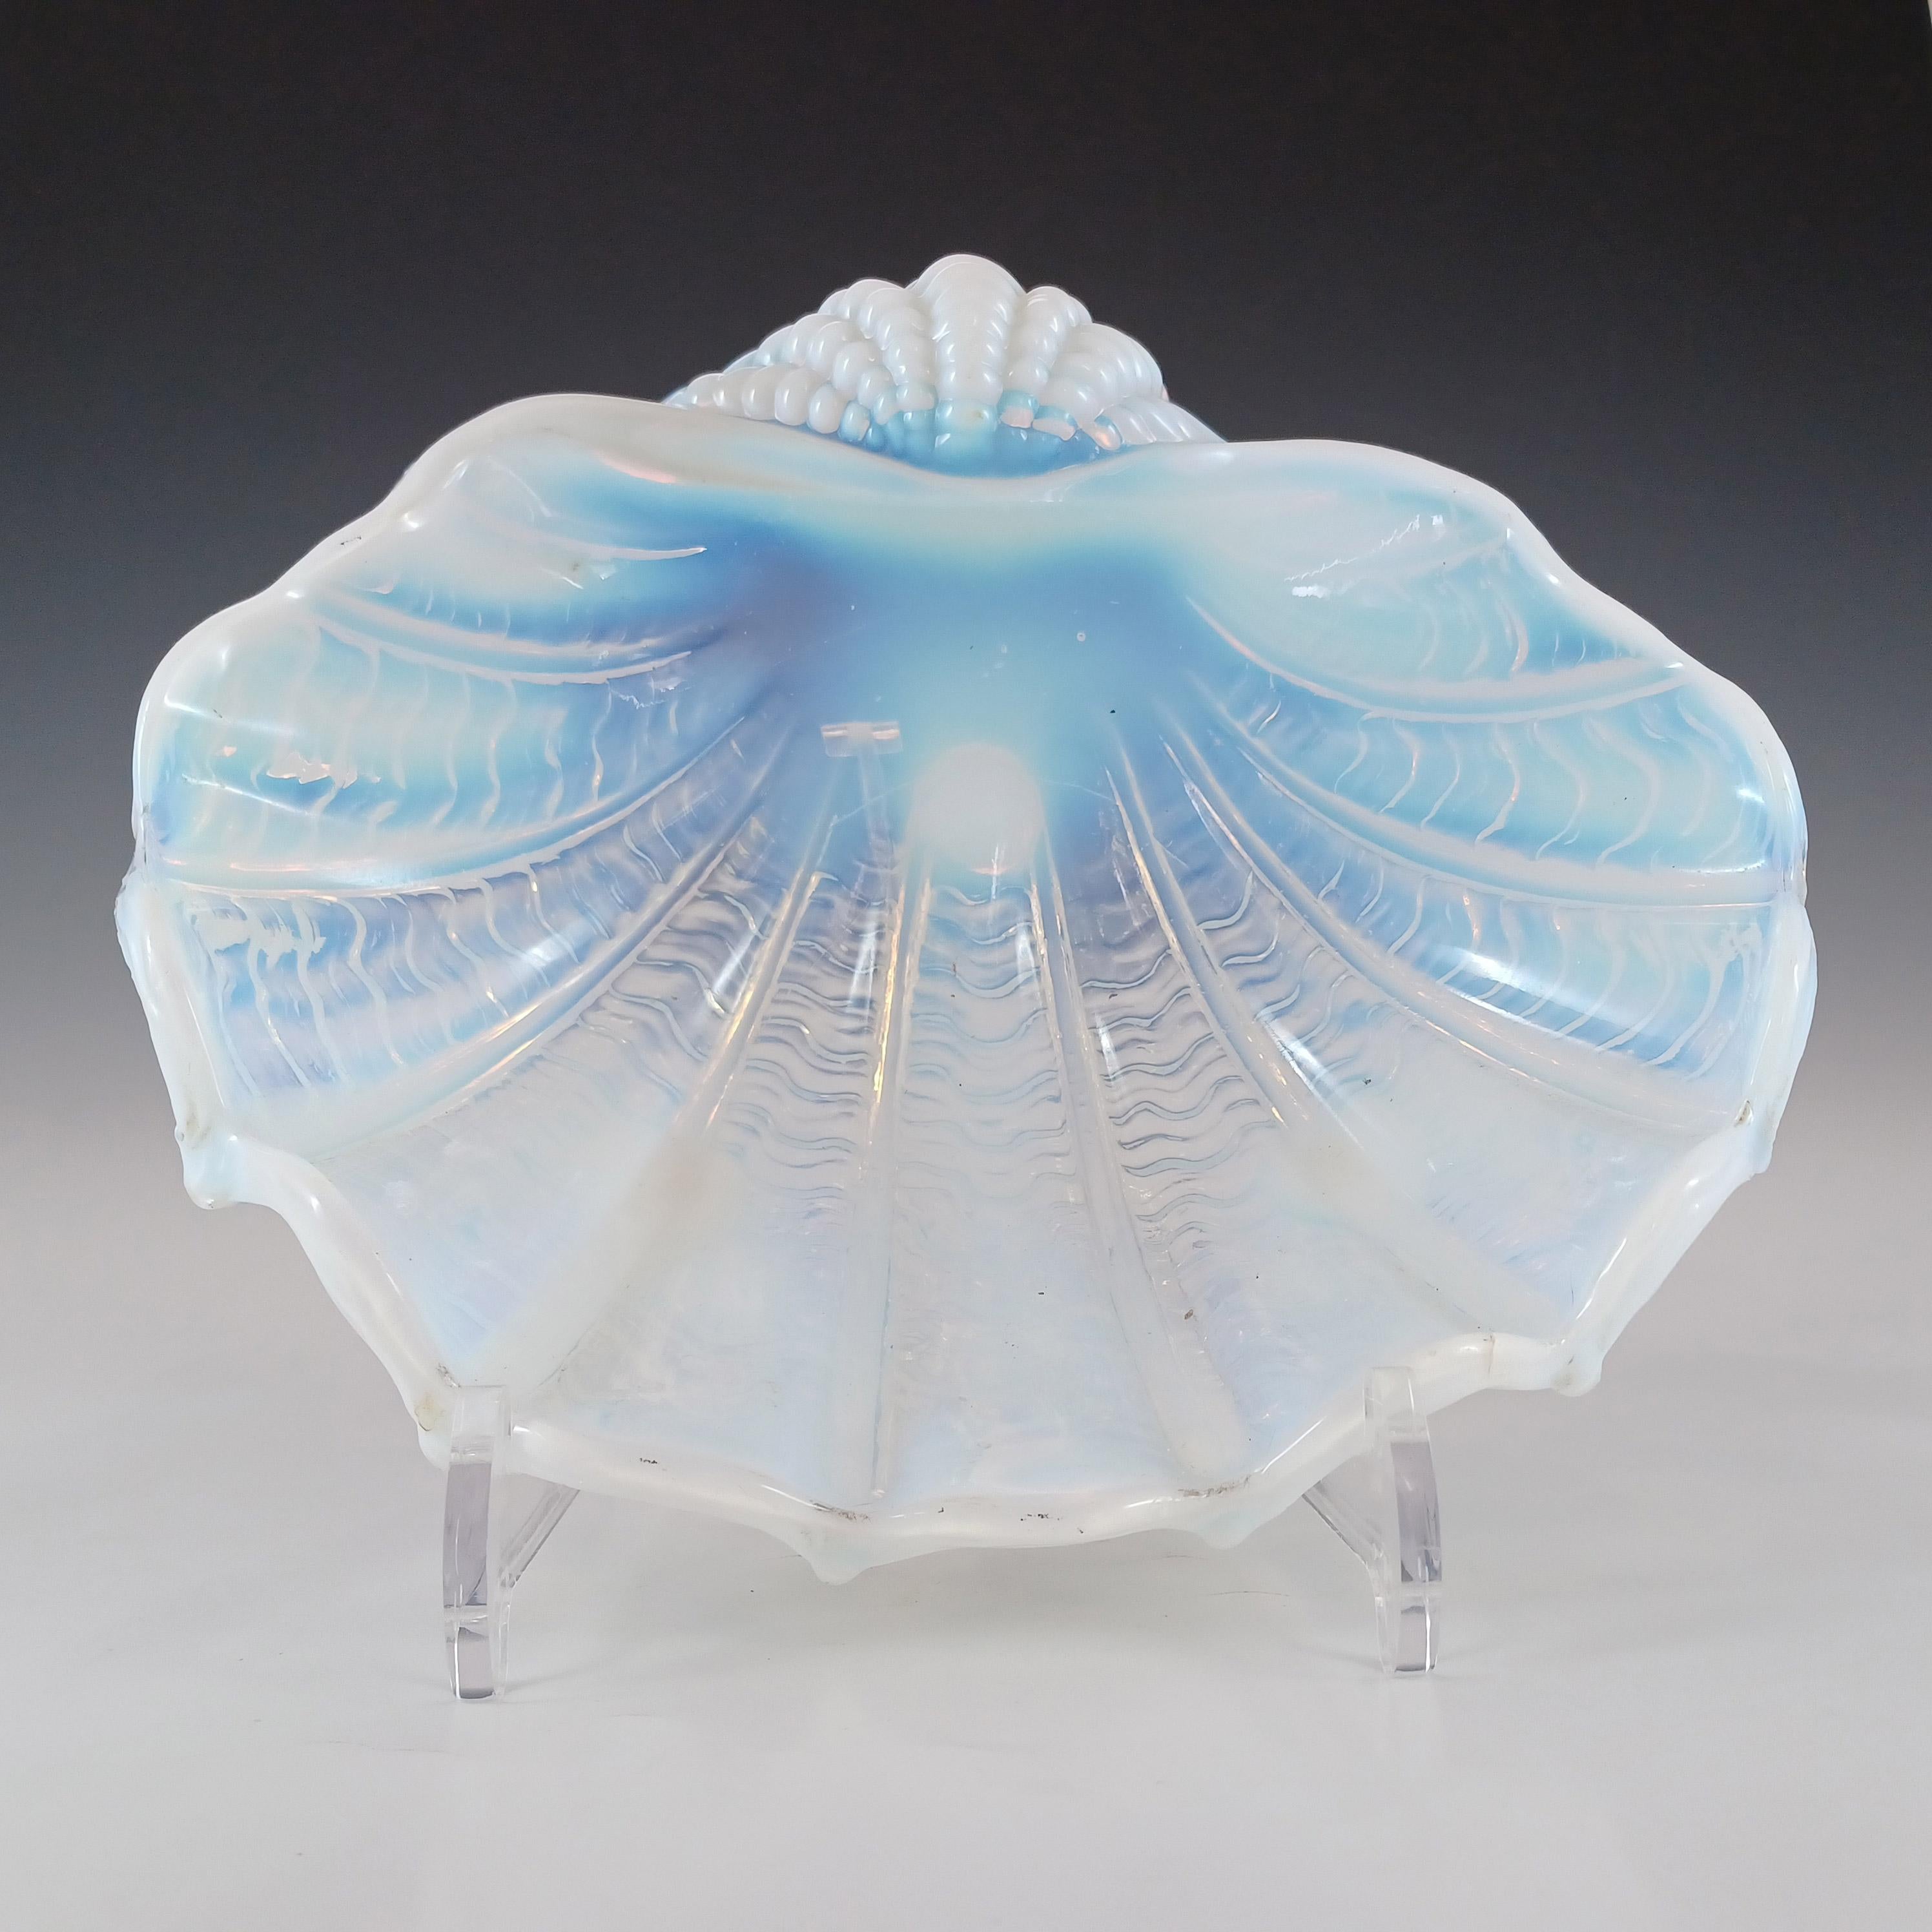 A wonderful and rare (only one I have ever seen) art deco or earlier glass clam shell shaped bowl/dish, made in opaline/opalescent glass. Manufacturer unknown, thought to be British.

Please note: the plastic stand is for display purposes only and